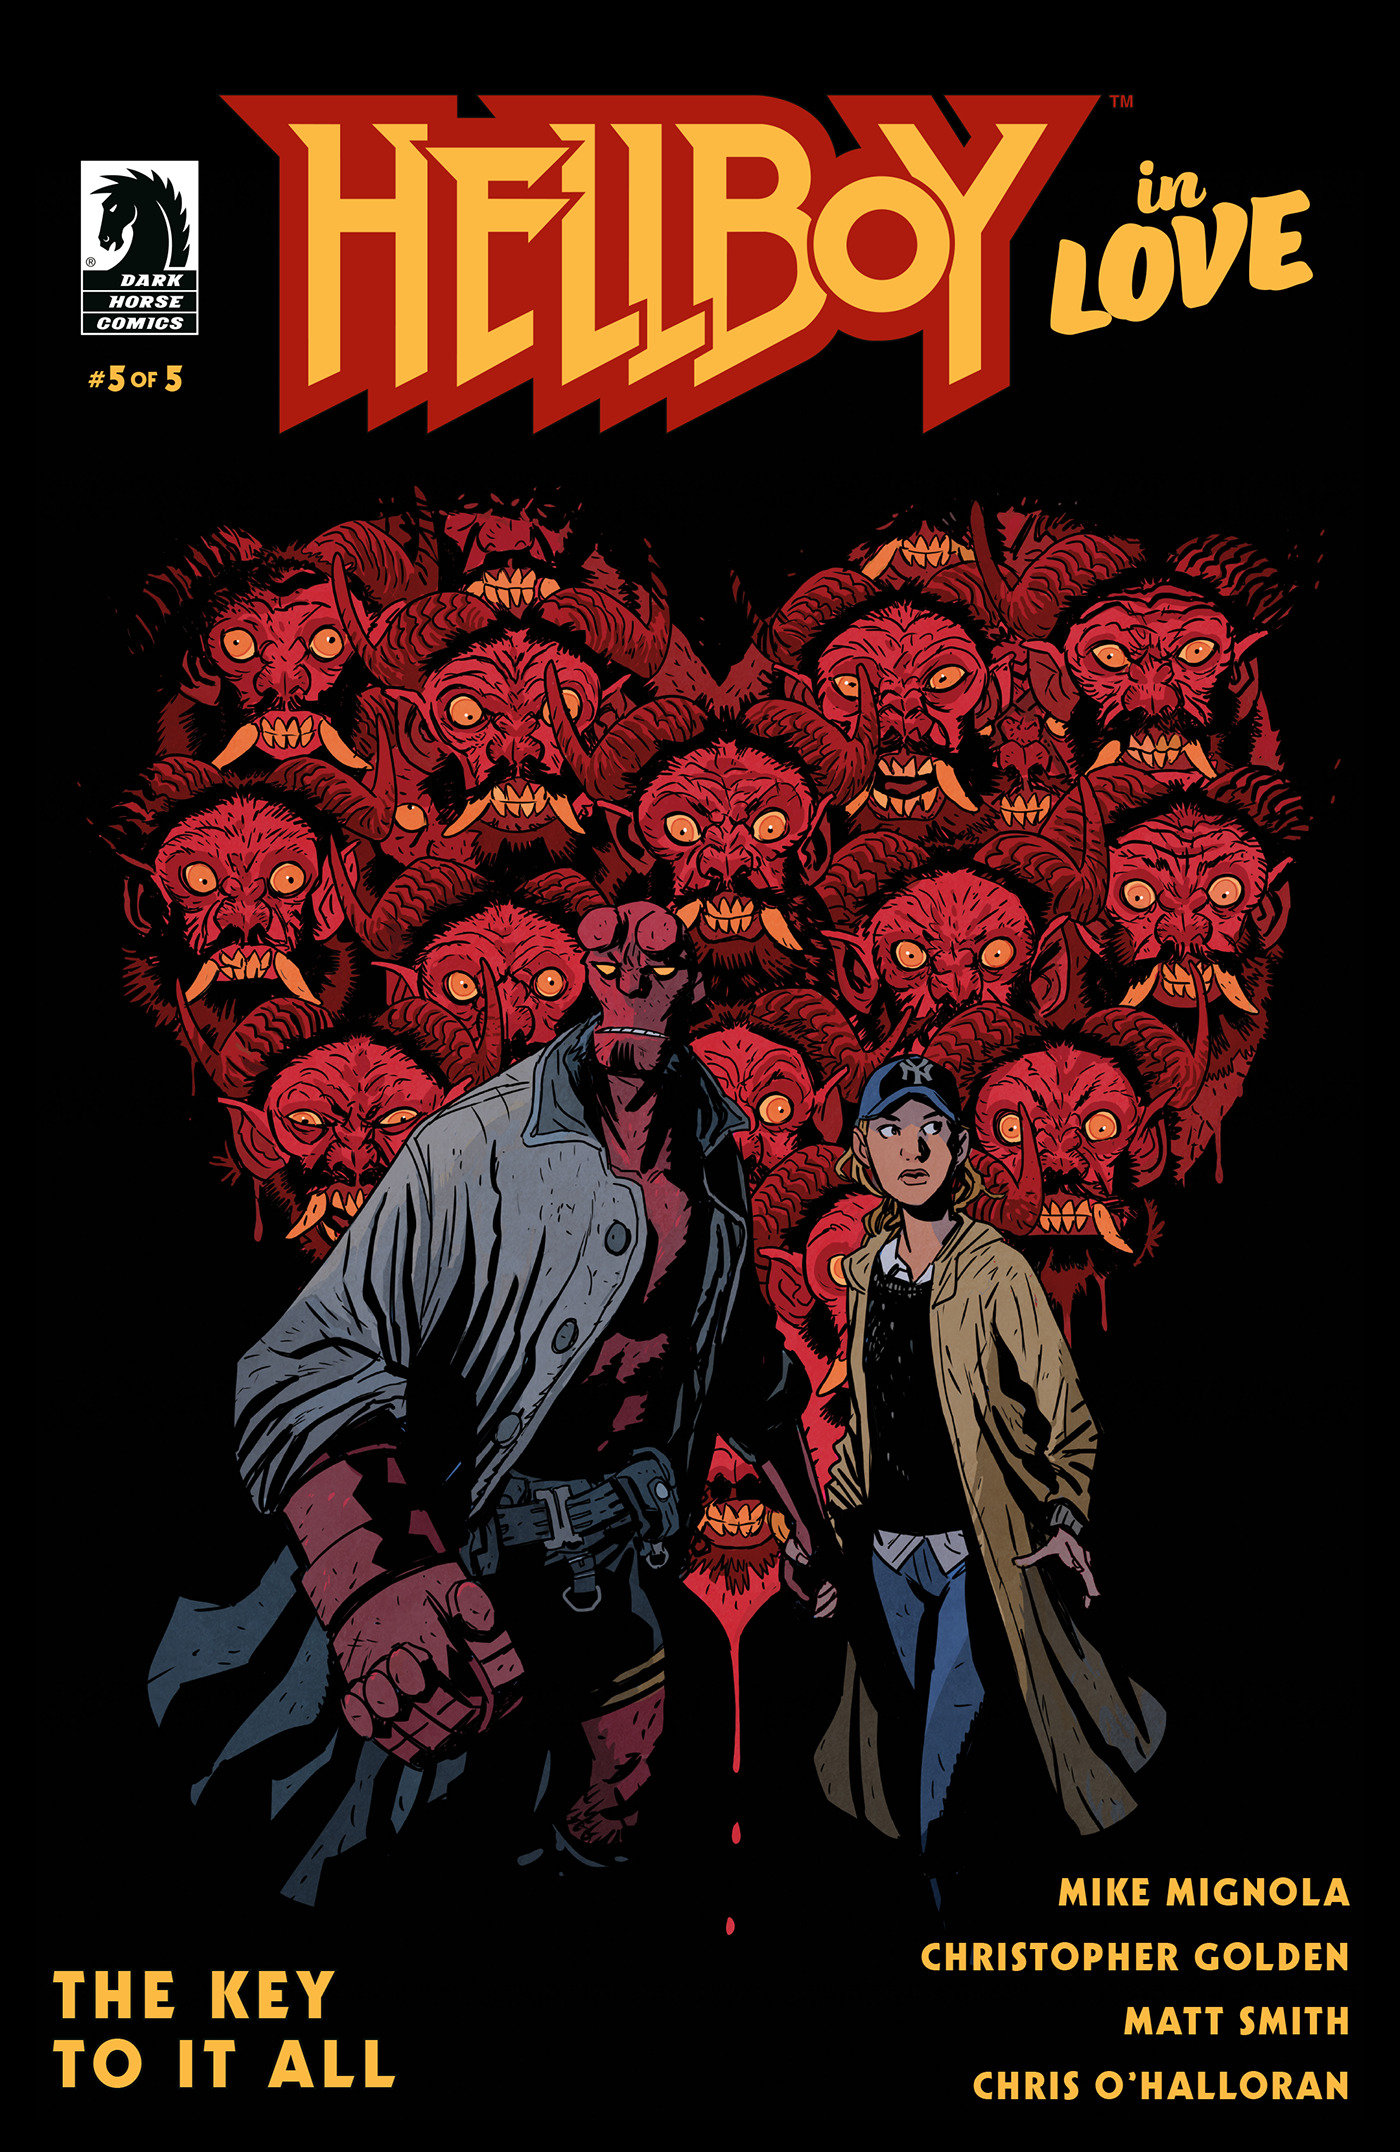 Hellboy & the B.P.R.D. Ongoing #67 Hellboy In Love #5 (Of 5)